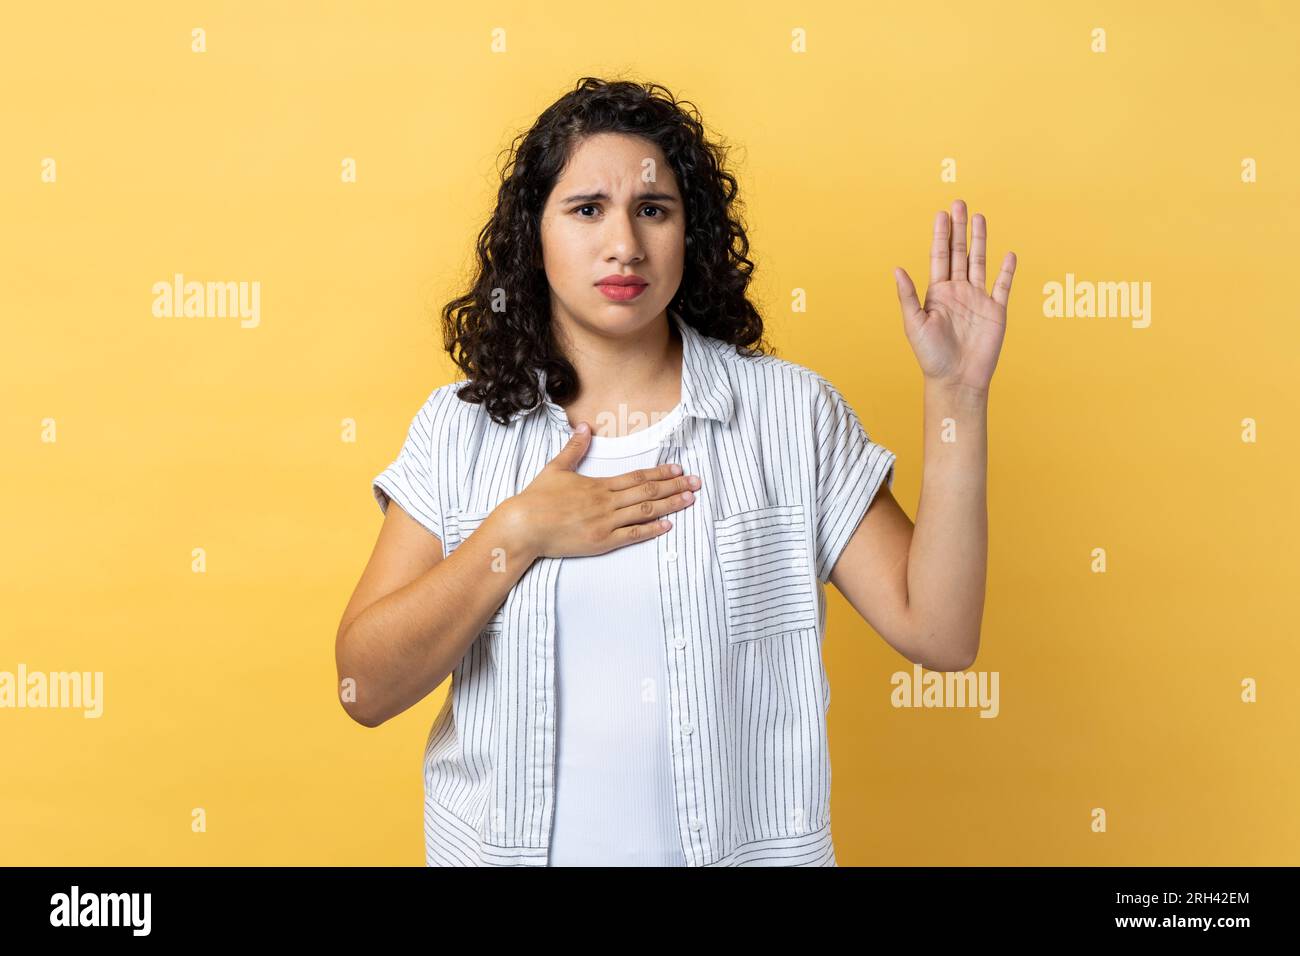 Portrait of serious responsible attractive woman with dark wavy hair raising her palm to take oath, female swearing to tell only truth. Indoor studio shot isolated on yellow background. Stock Photo